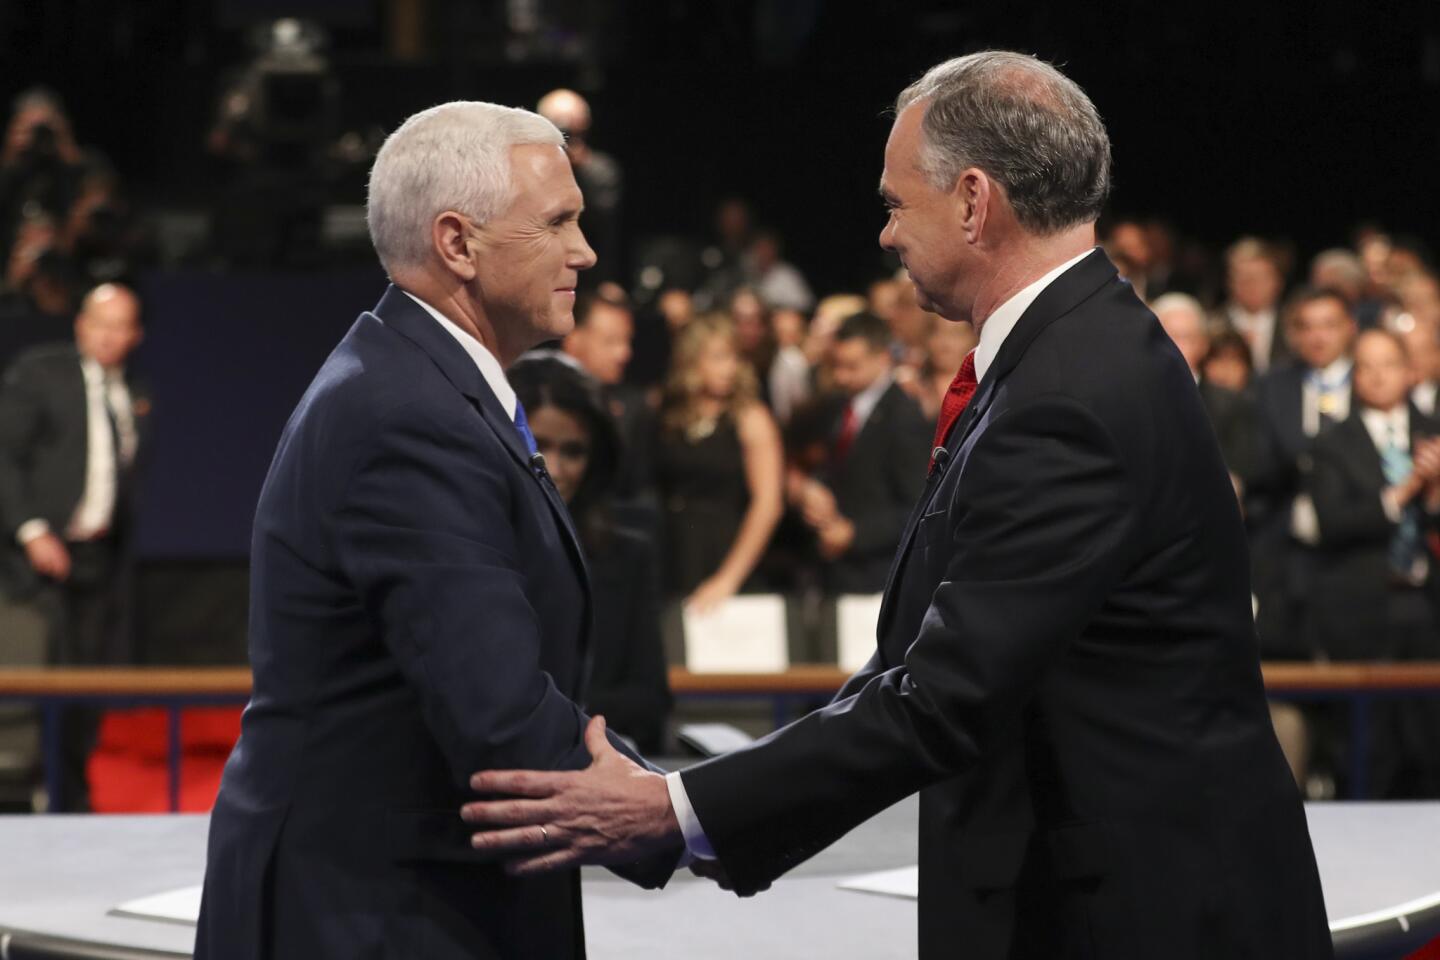 Republican vice-presidential nominee Gov. Mike Pence and Democratic vice-presidential nominee Sen. Tim Kaine shake hands after the vice-presidential debate at Longwood University in Farmville, Va., Tuesday, Oct. 4, 2016.